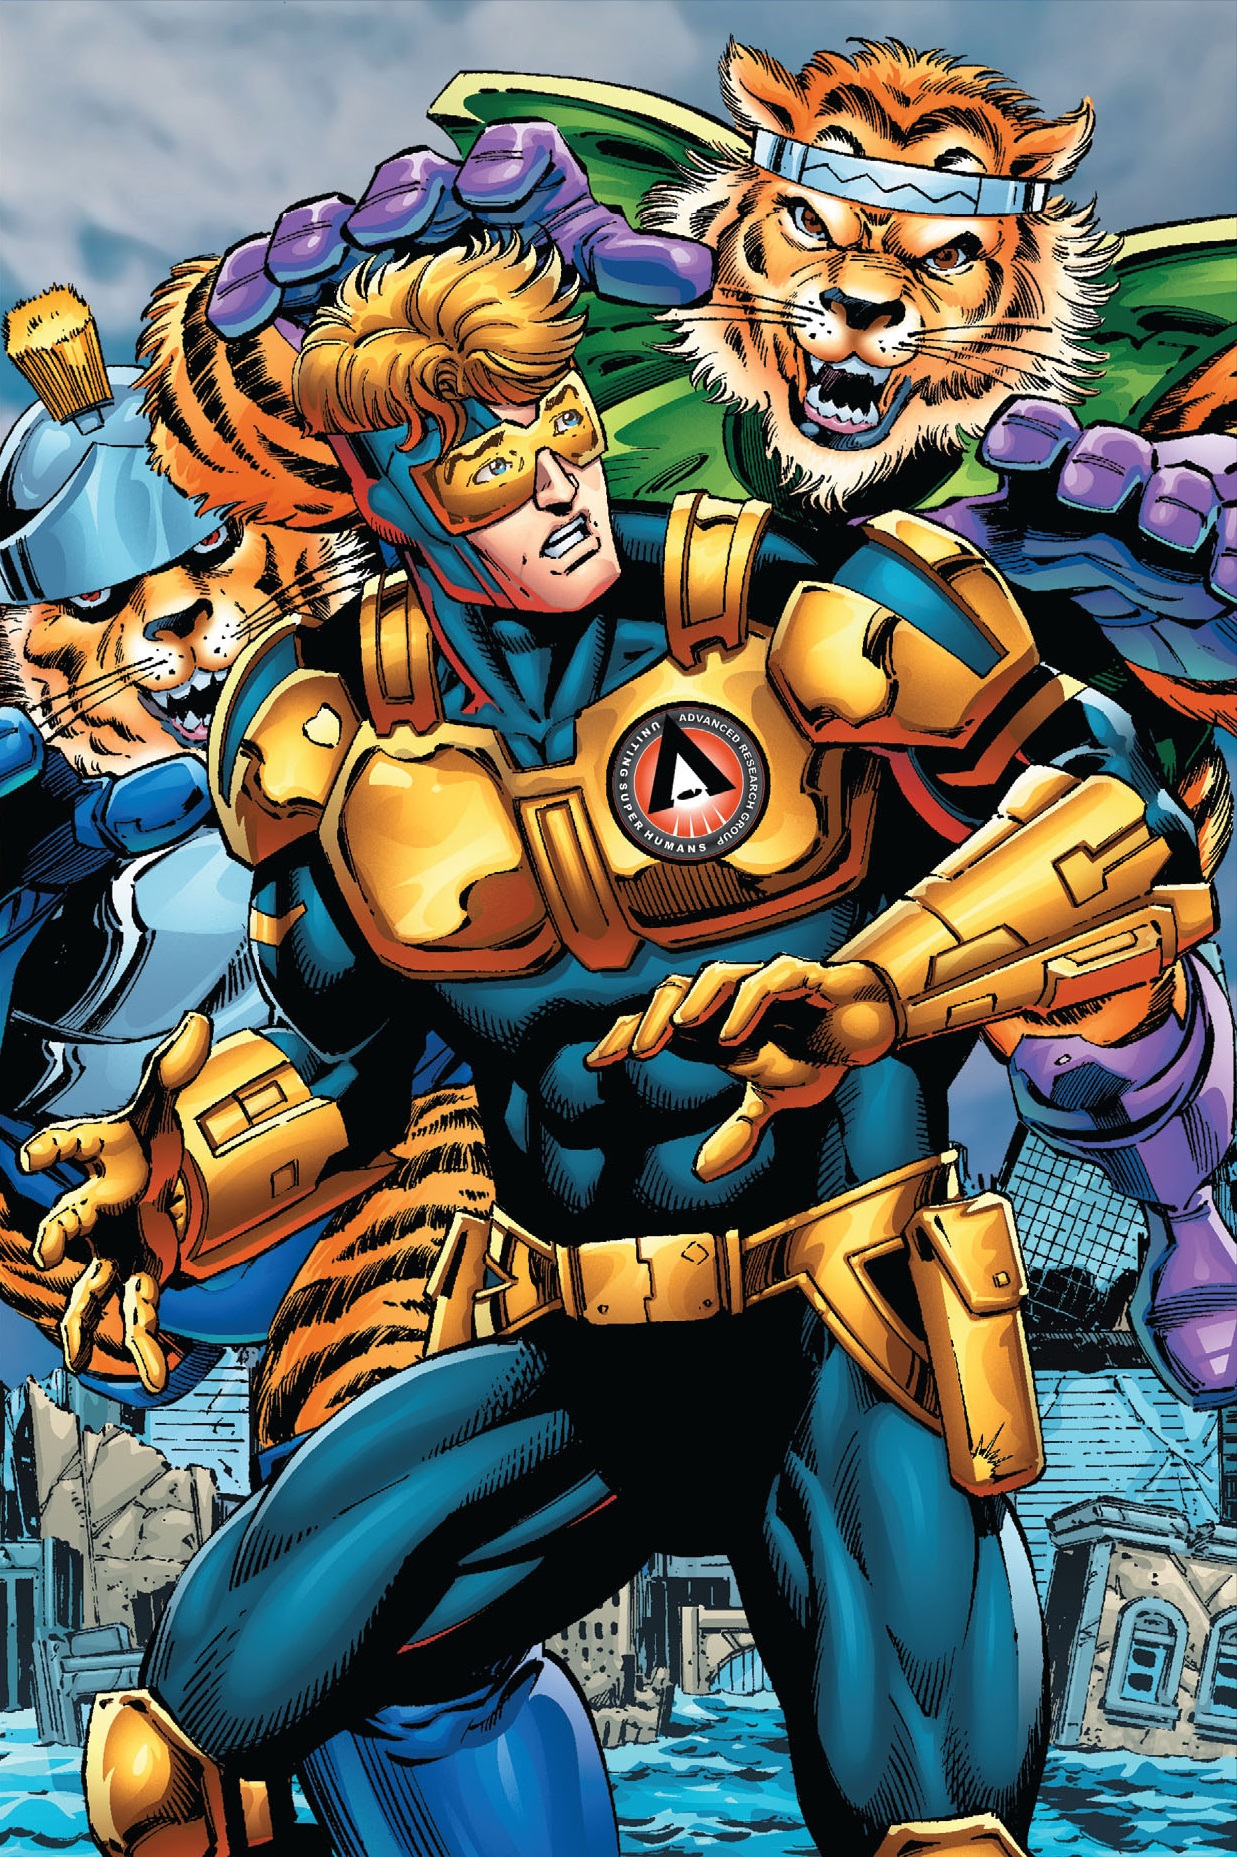 Amazing Booster Gold Pictures & Backgrounds